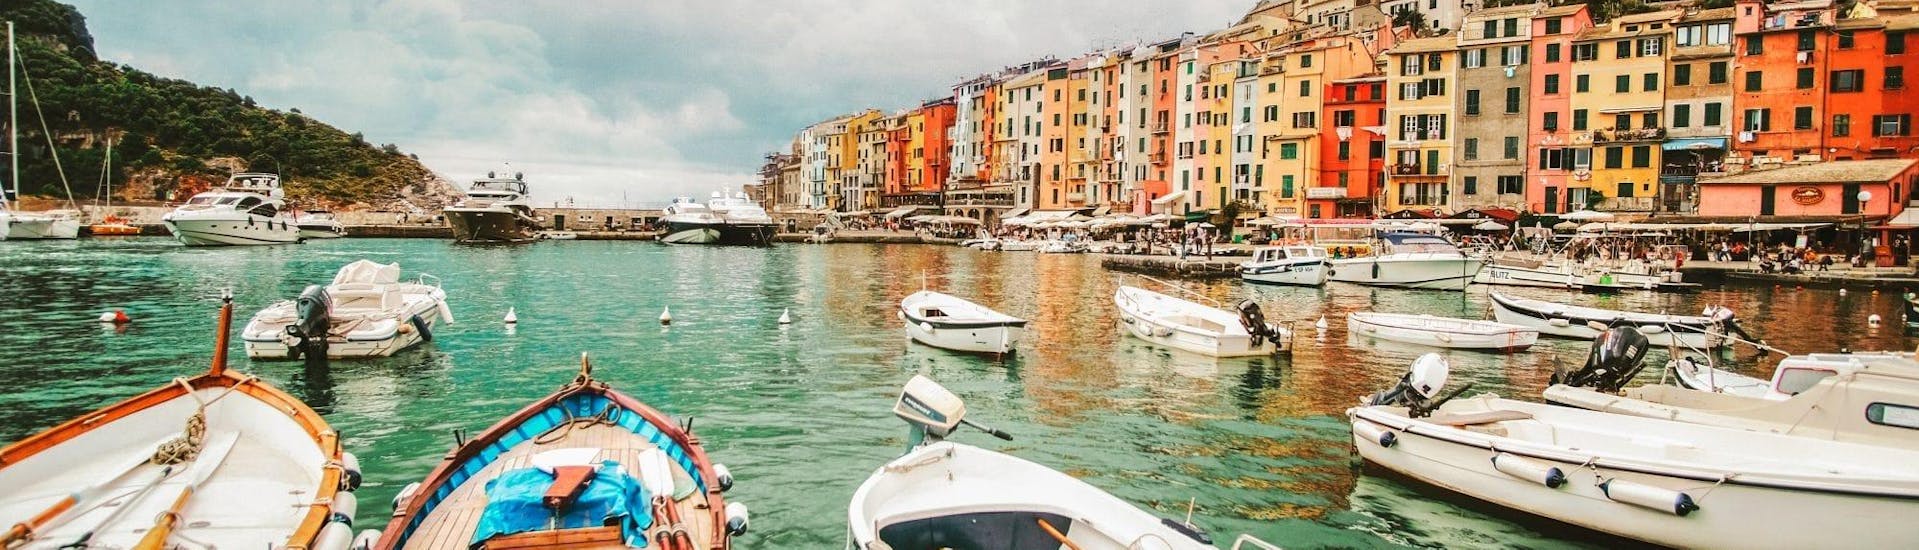 The beautiful landscape of Porto Venere that you can admire during the boat trip to Porto Venere and Vernazza with Sightseeing with Cinque Terre Ferries.